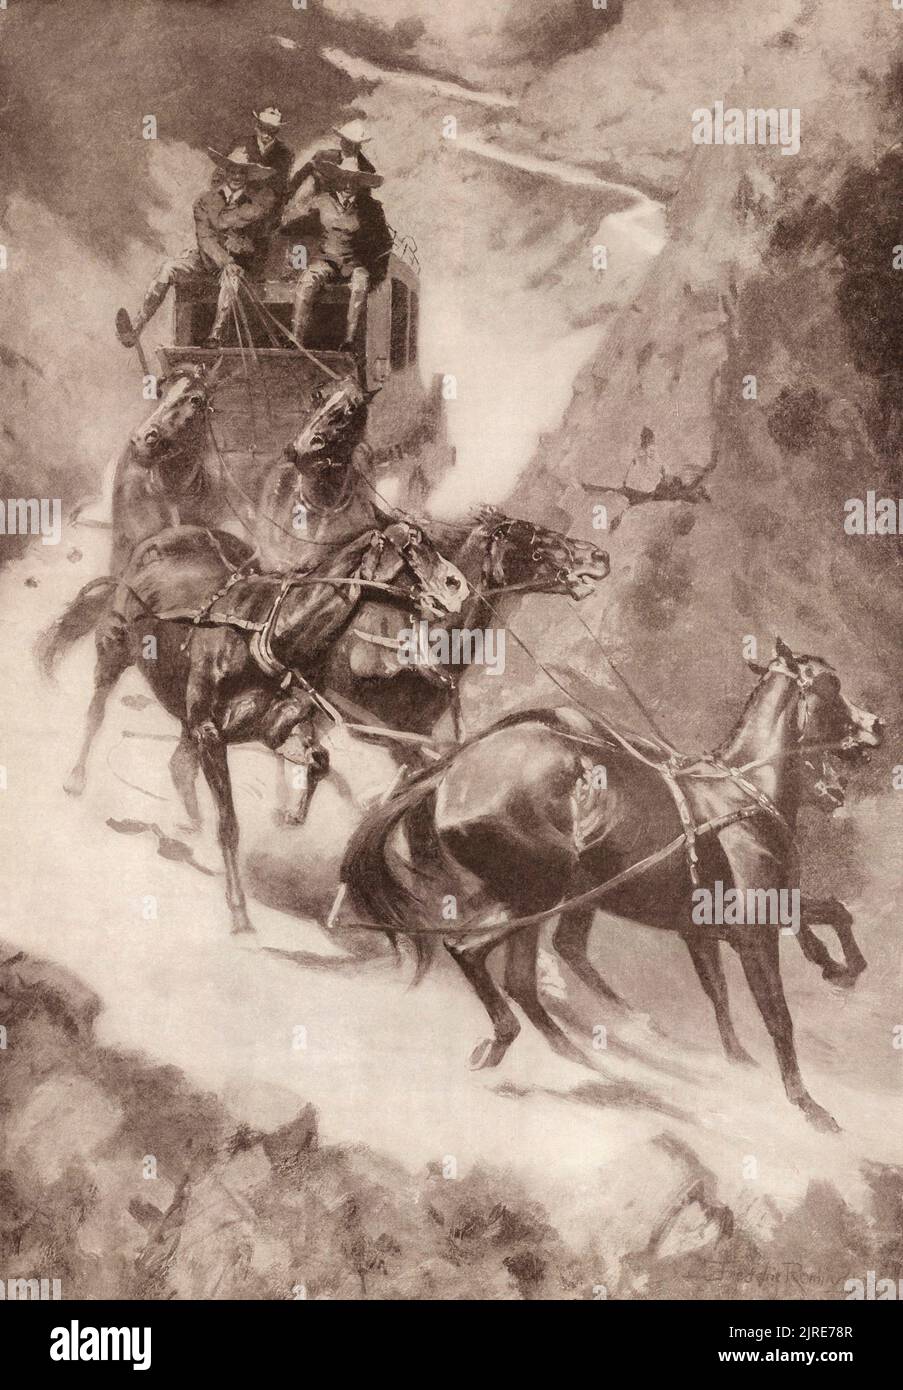 Amateur Rocky Mountain stage driving.  After a work by American artist Frederic Sackrider Remington, 1861 – 1909. Stock Photo